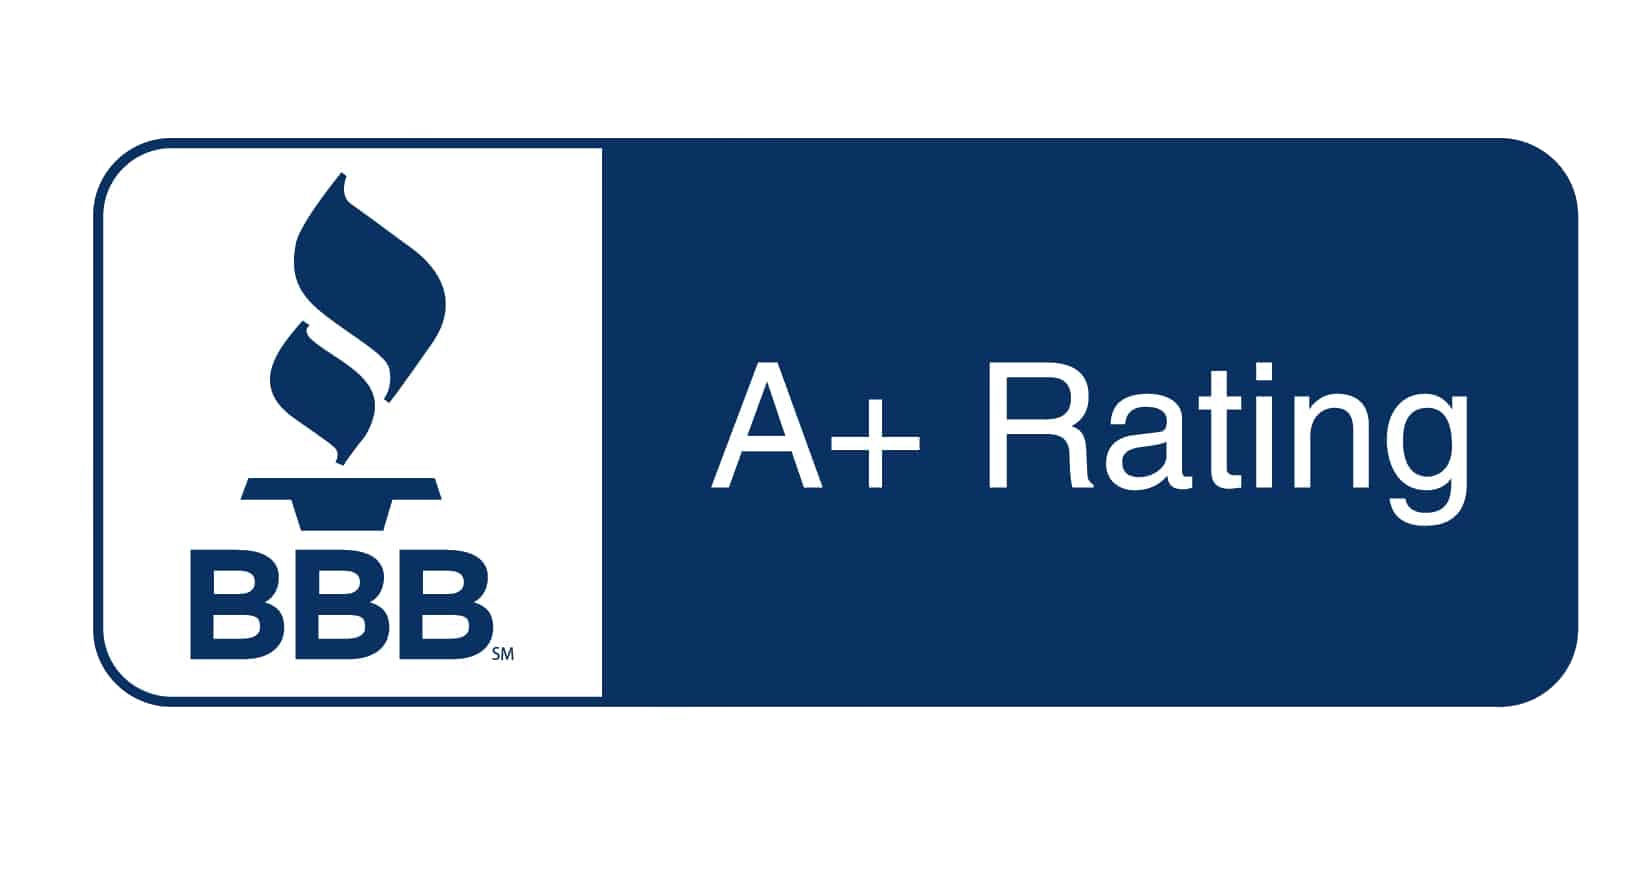 BBB A+ Rating - Central Florida Business Brokerage